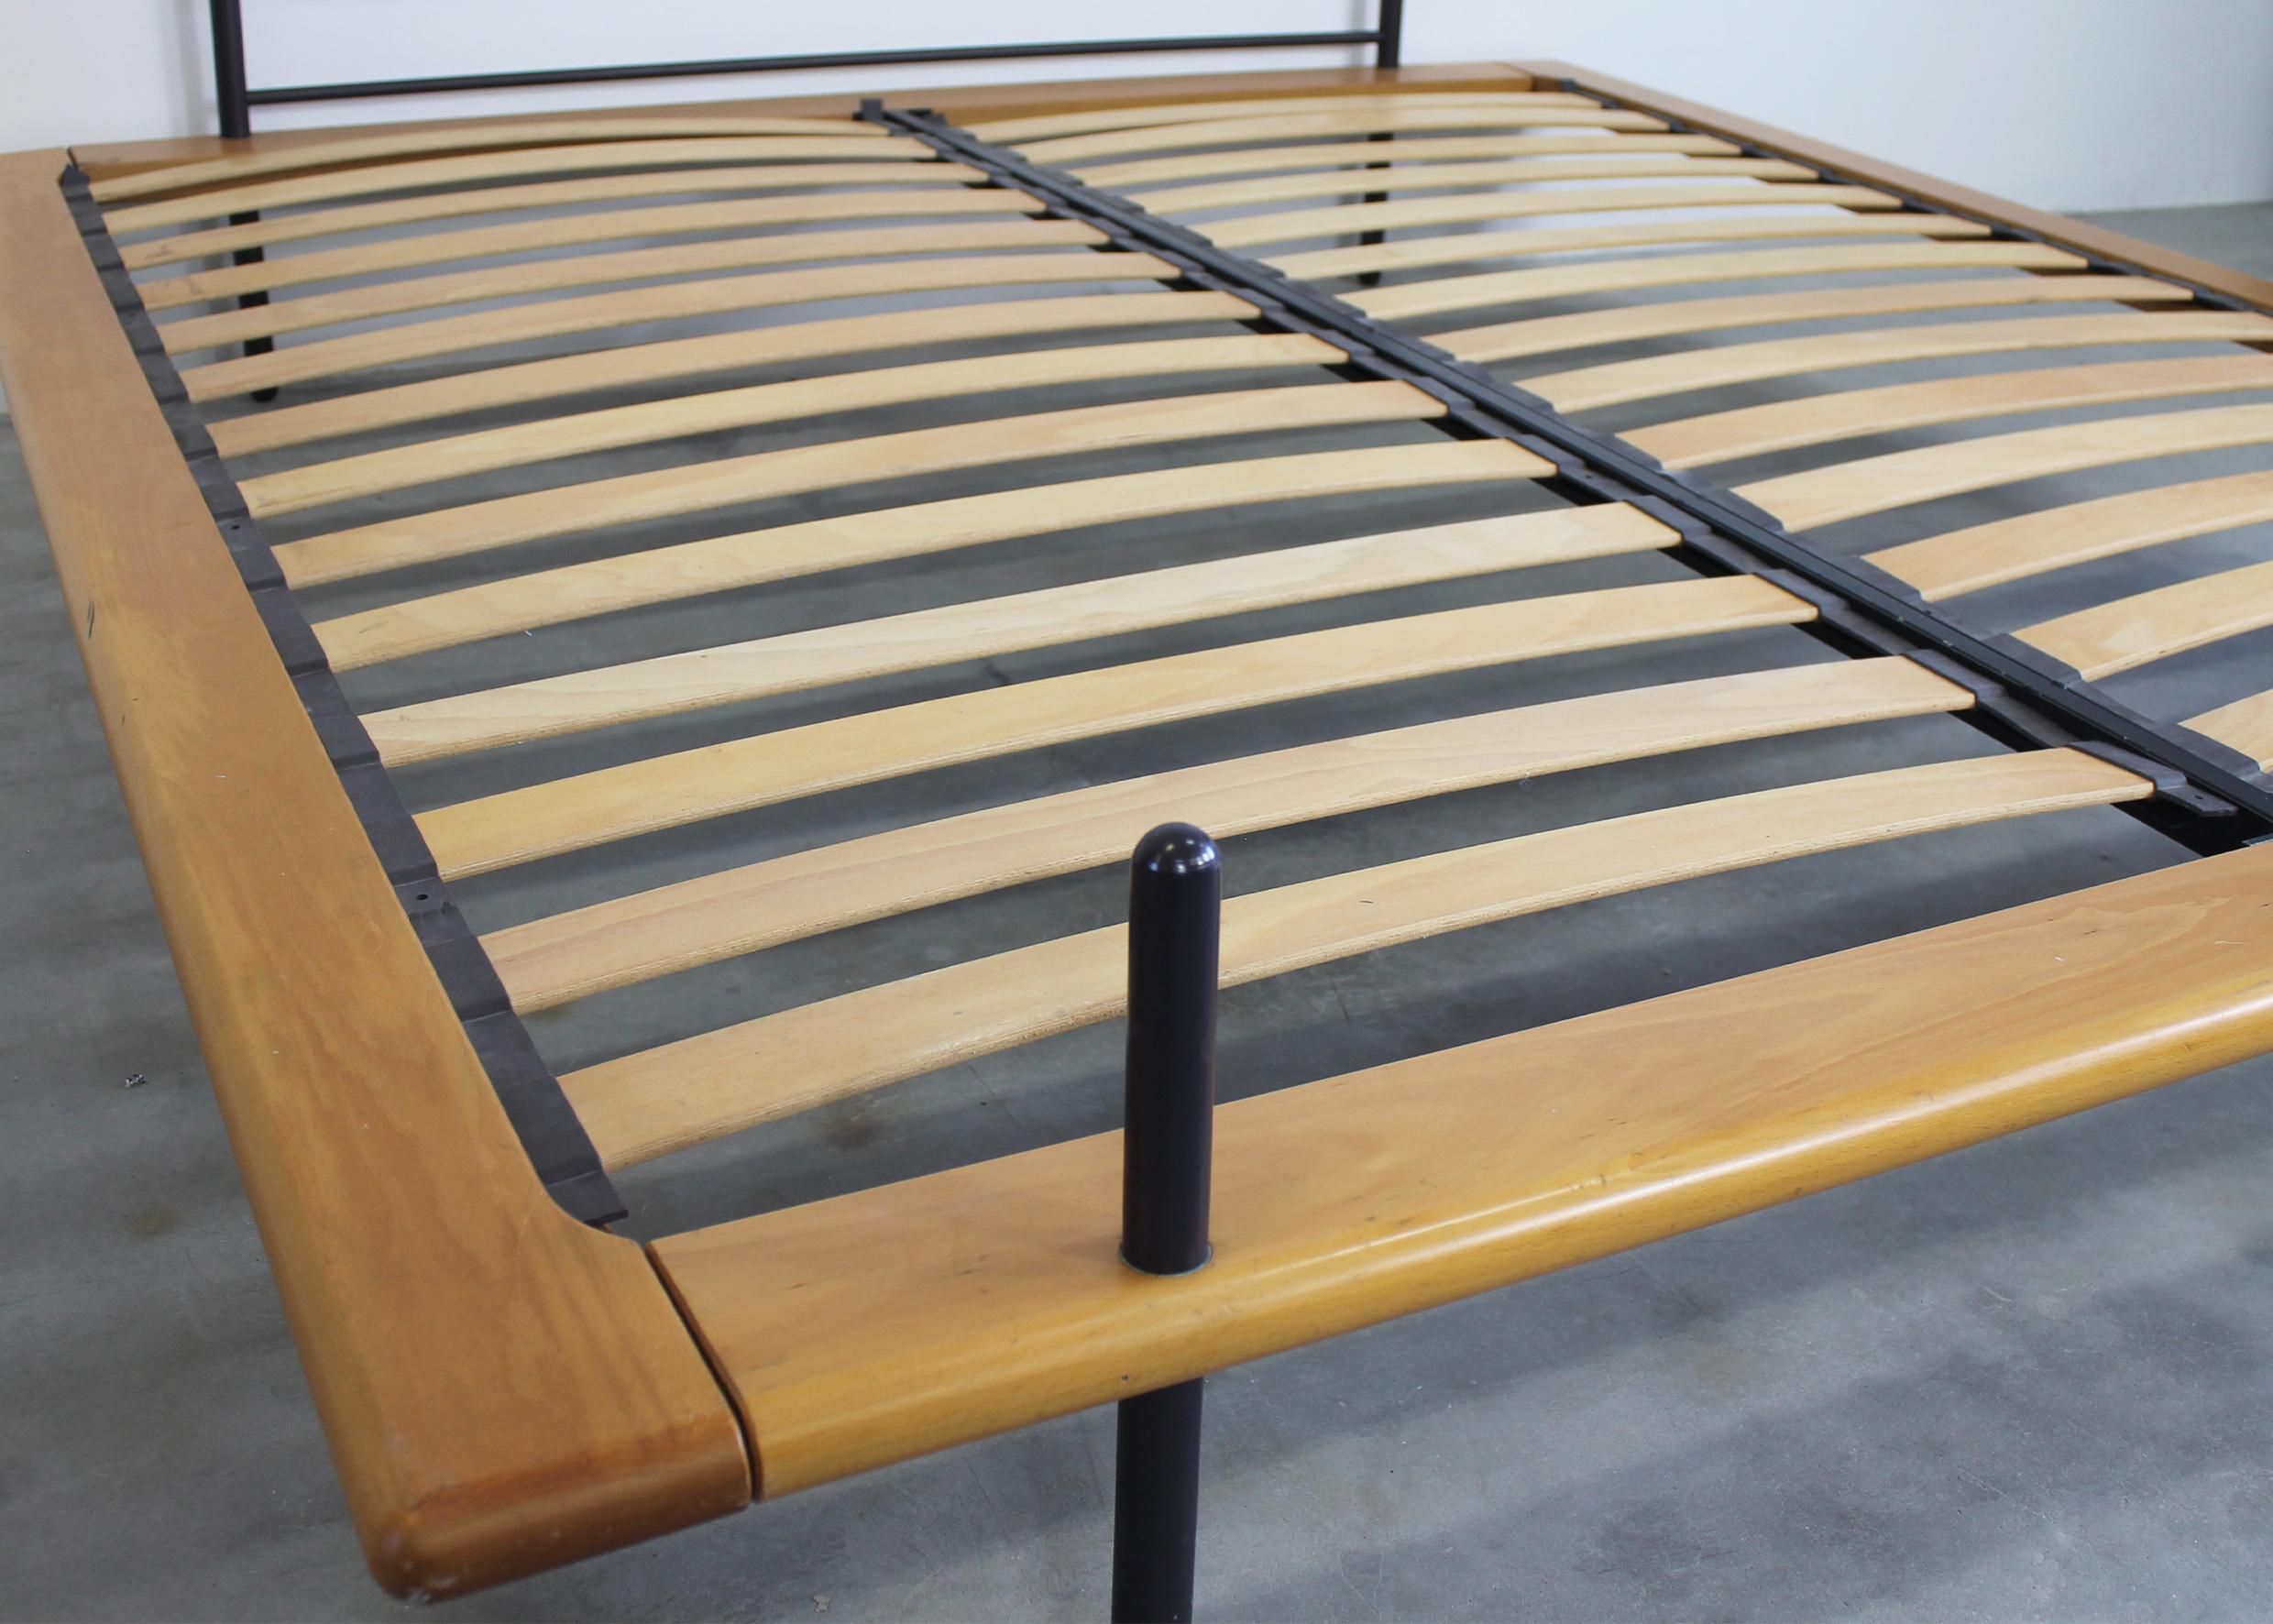 Italian Paolo Pallucco Acquariano Bed Structure in Beechwood and Steel 1980s Italy